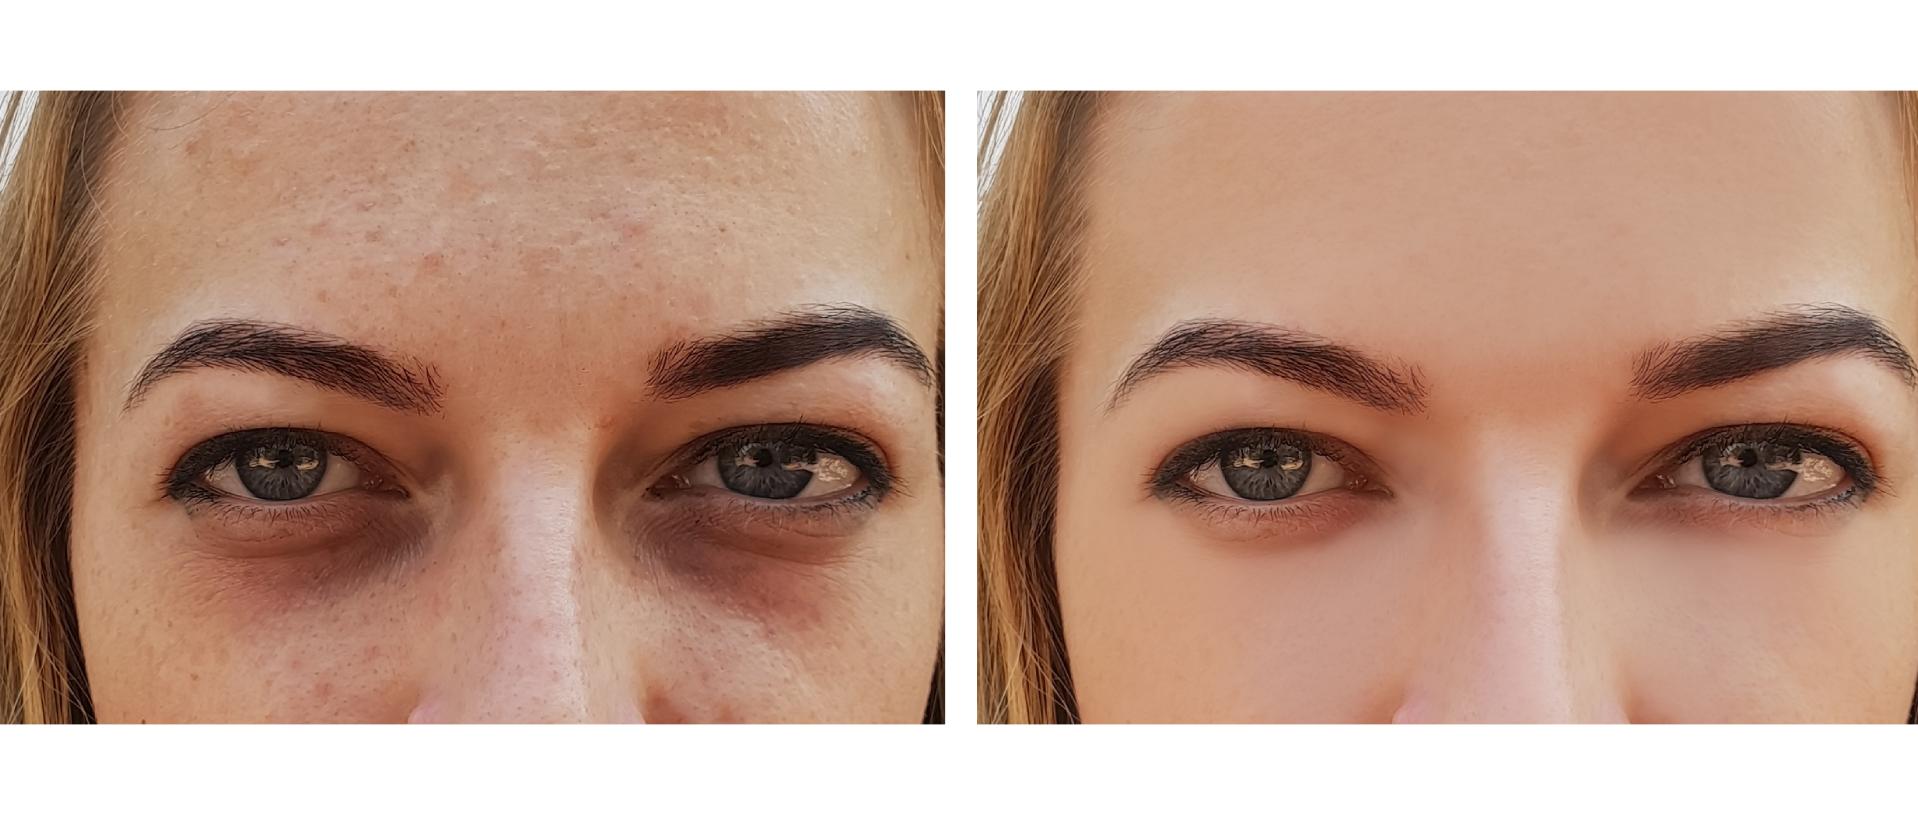 women's eyes before and after cosmetic procedures